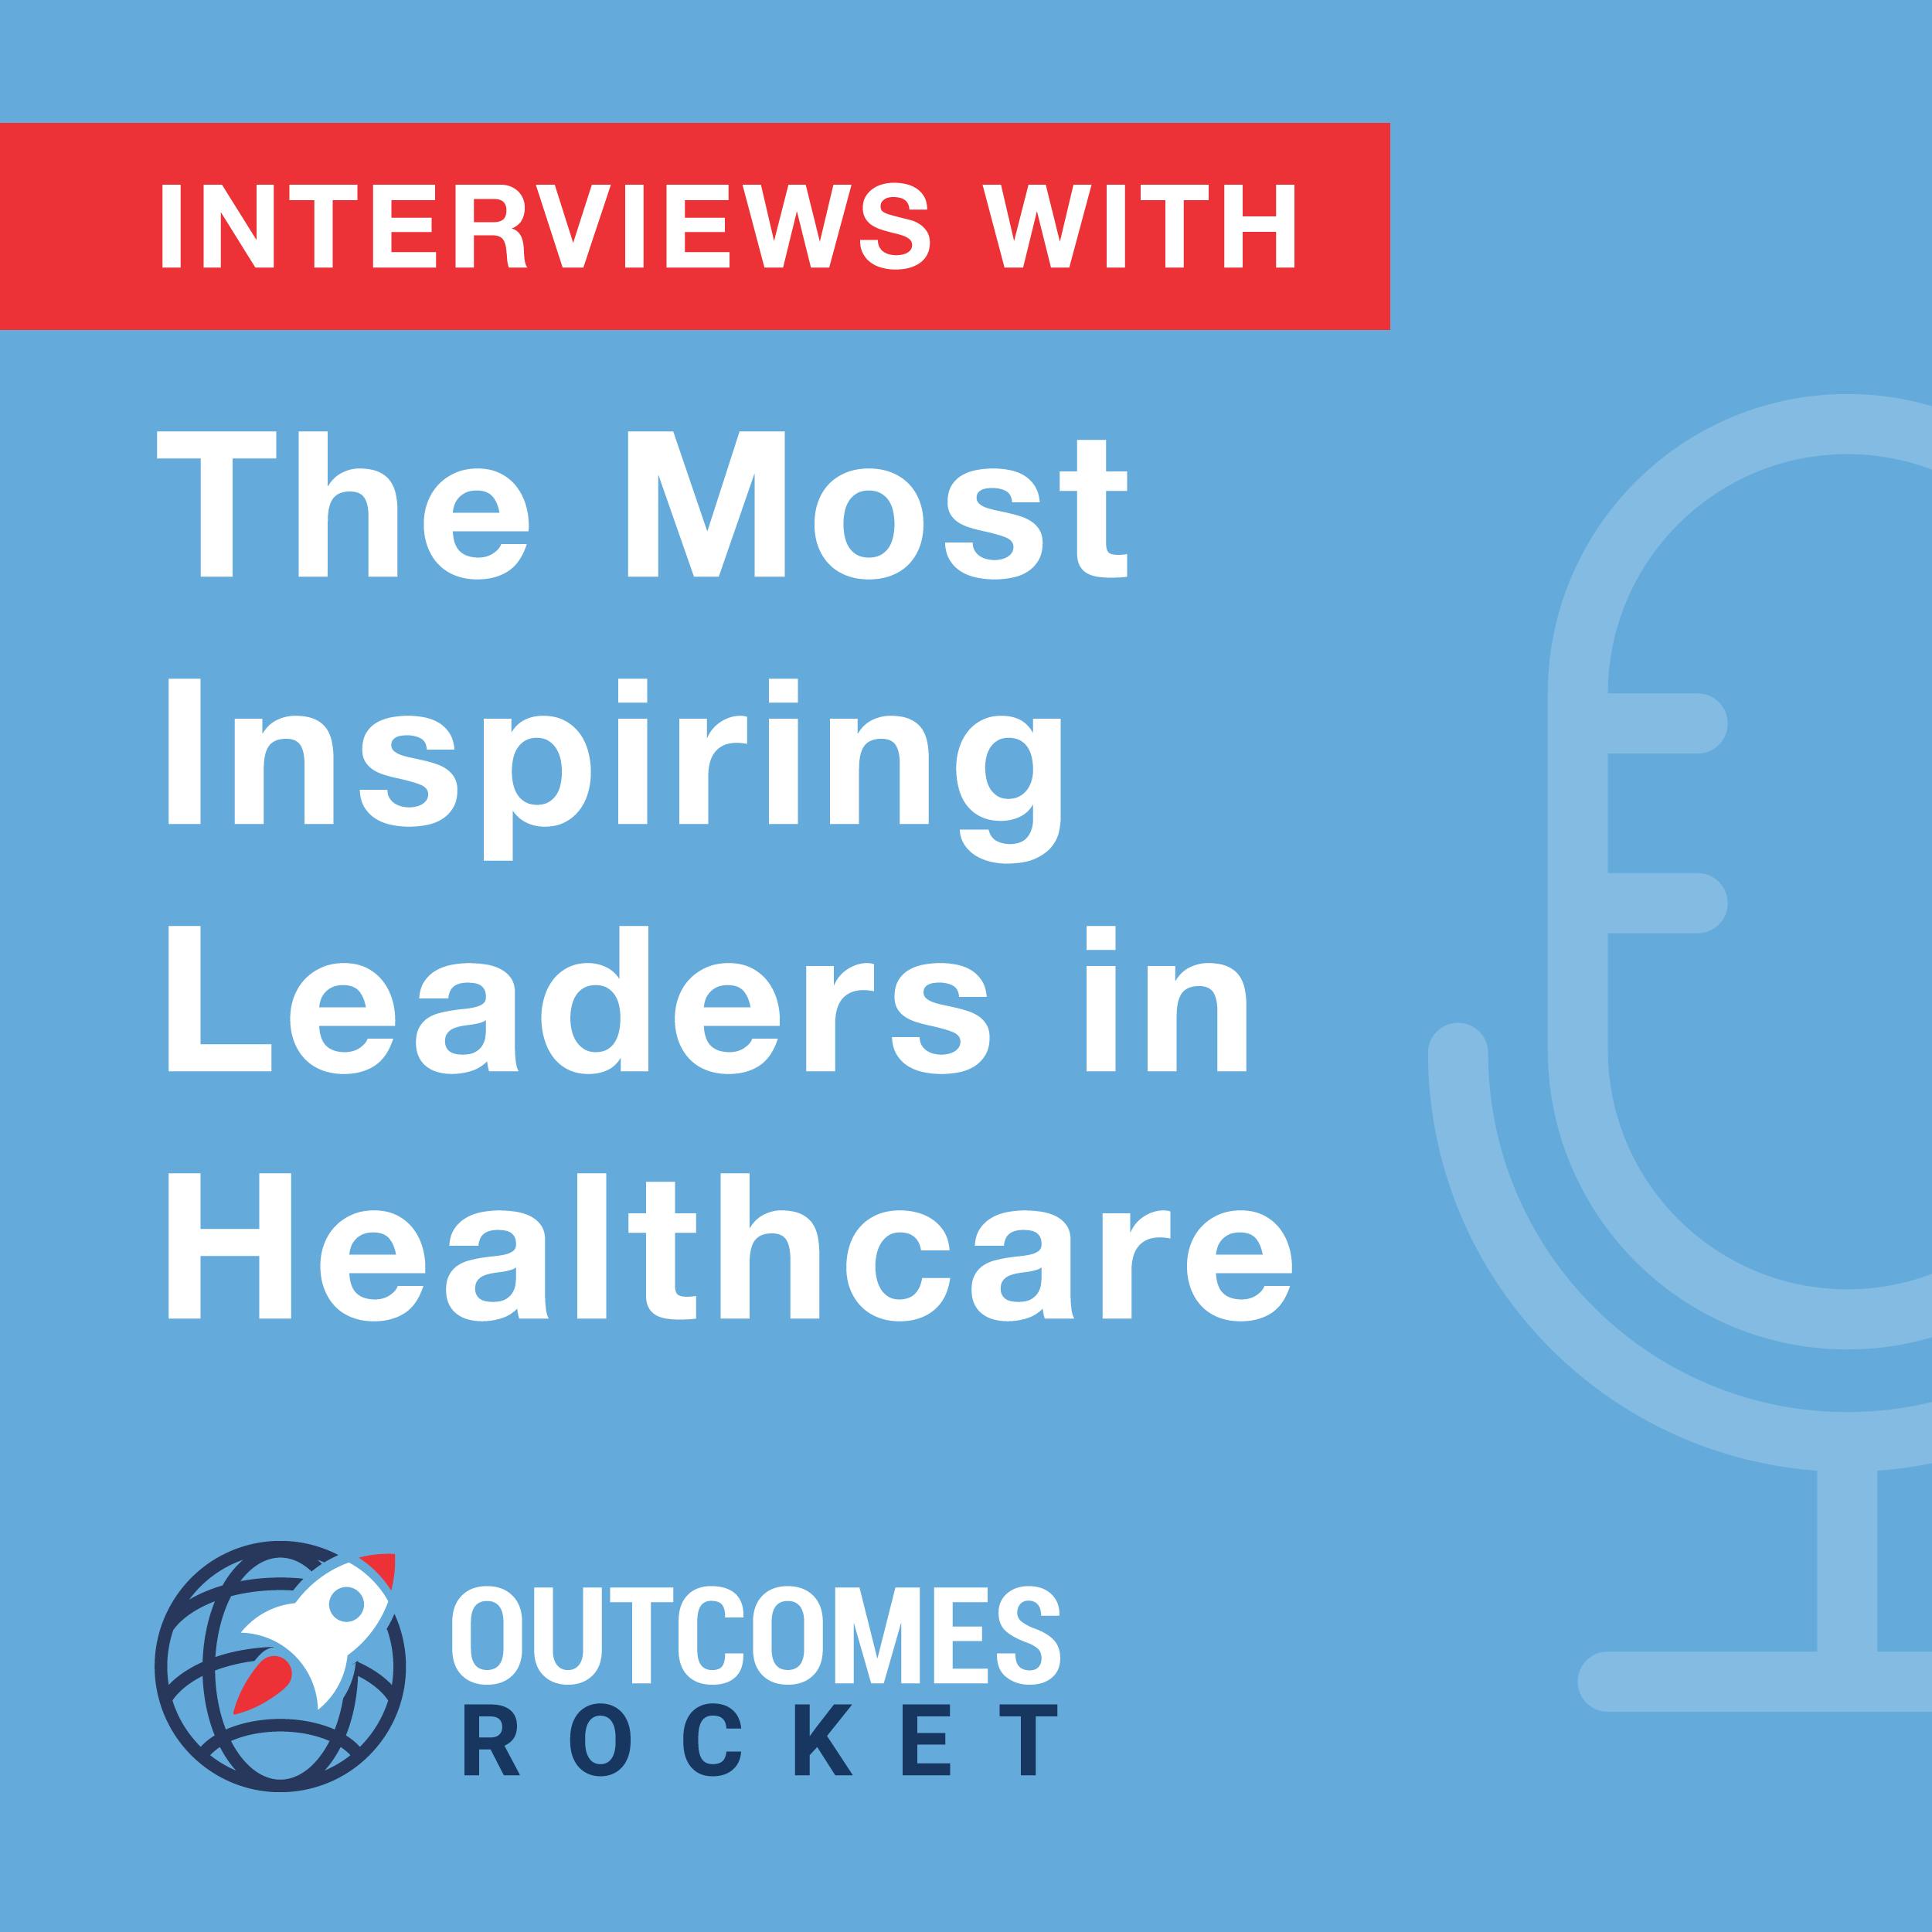 A New Way to Engage Patients for Better Outcomes with Todd Johnson, Chief Executive Officer at HealthLoop, Inc.